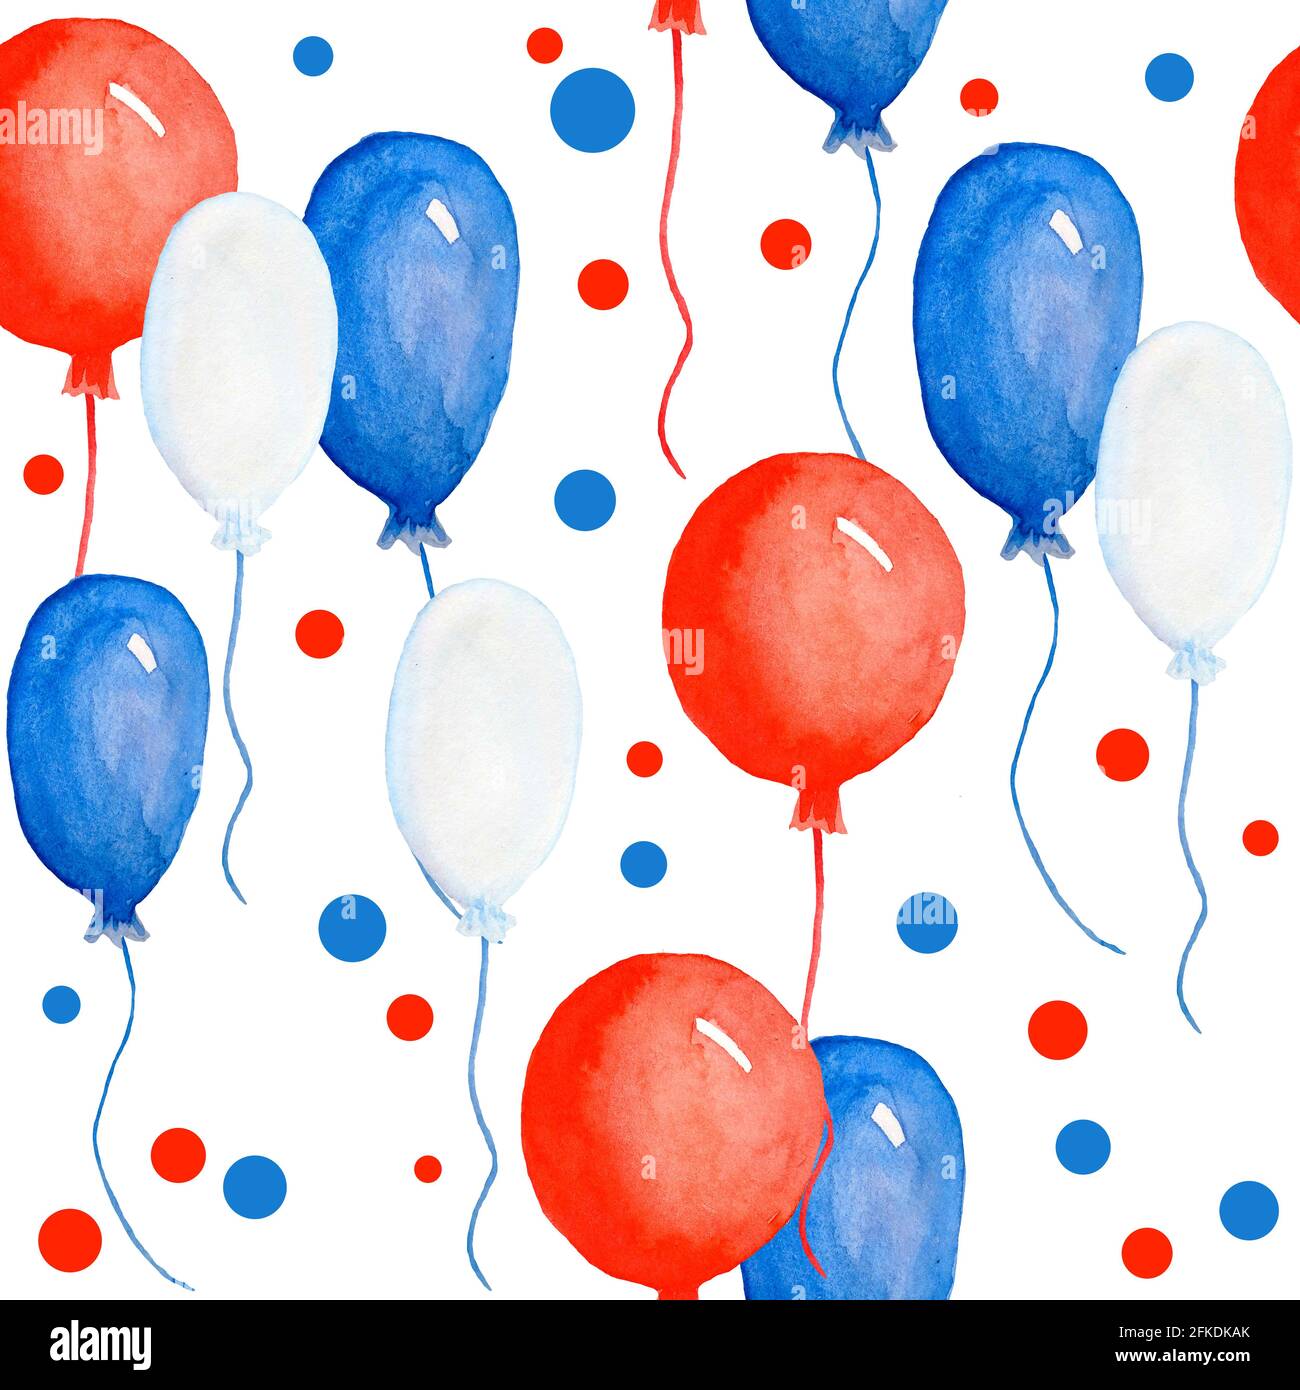 Watercolor seamless hand drawn pattern for US Independence day 4th fourth of July patriotic background print, balloons. Red blue white colors stripes stars design, celebration summer party Stock Photo